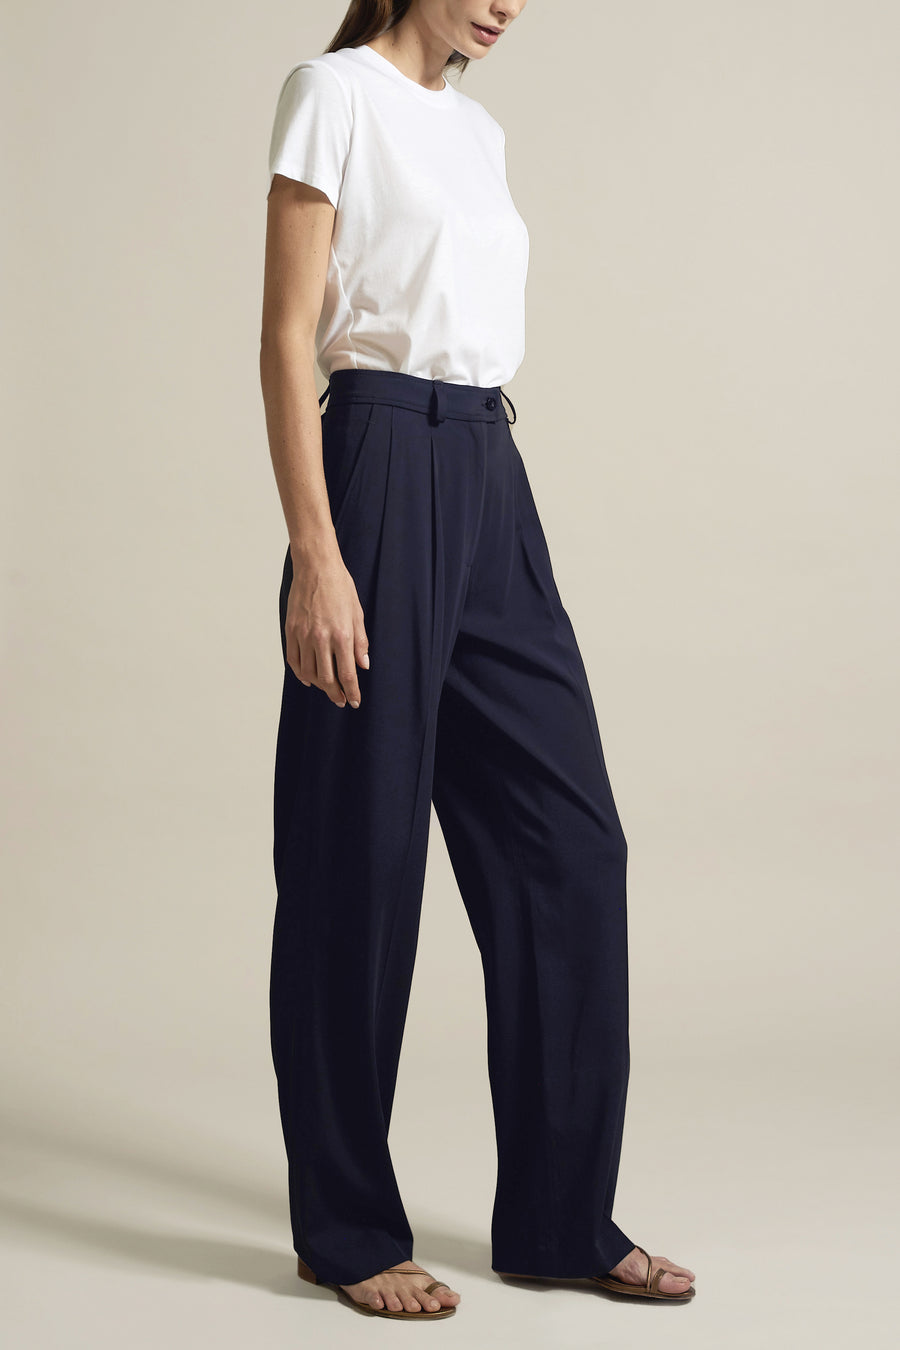 Le Smoking Trouser in Navy Sporty Suiting